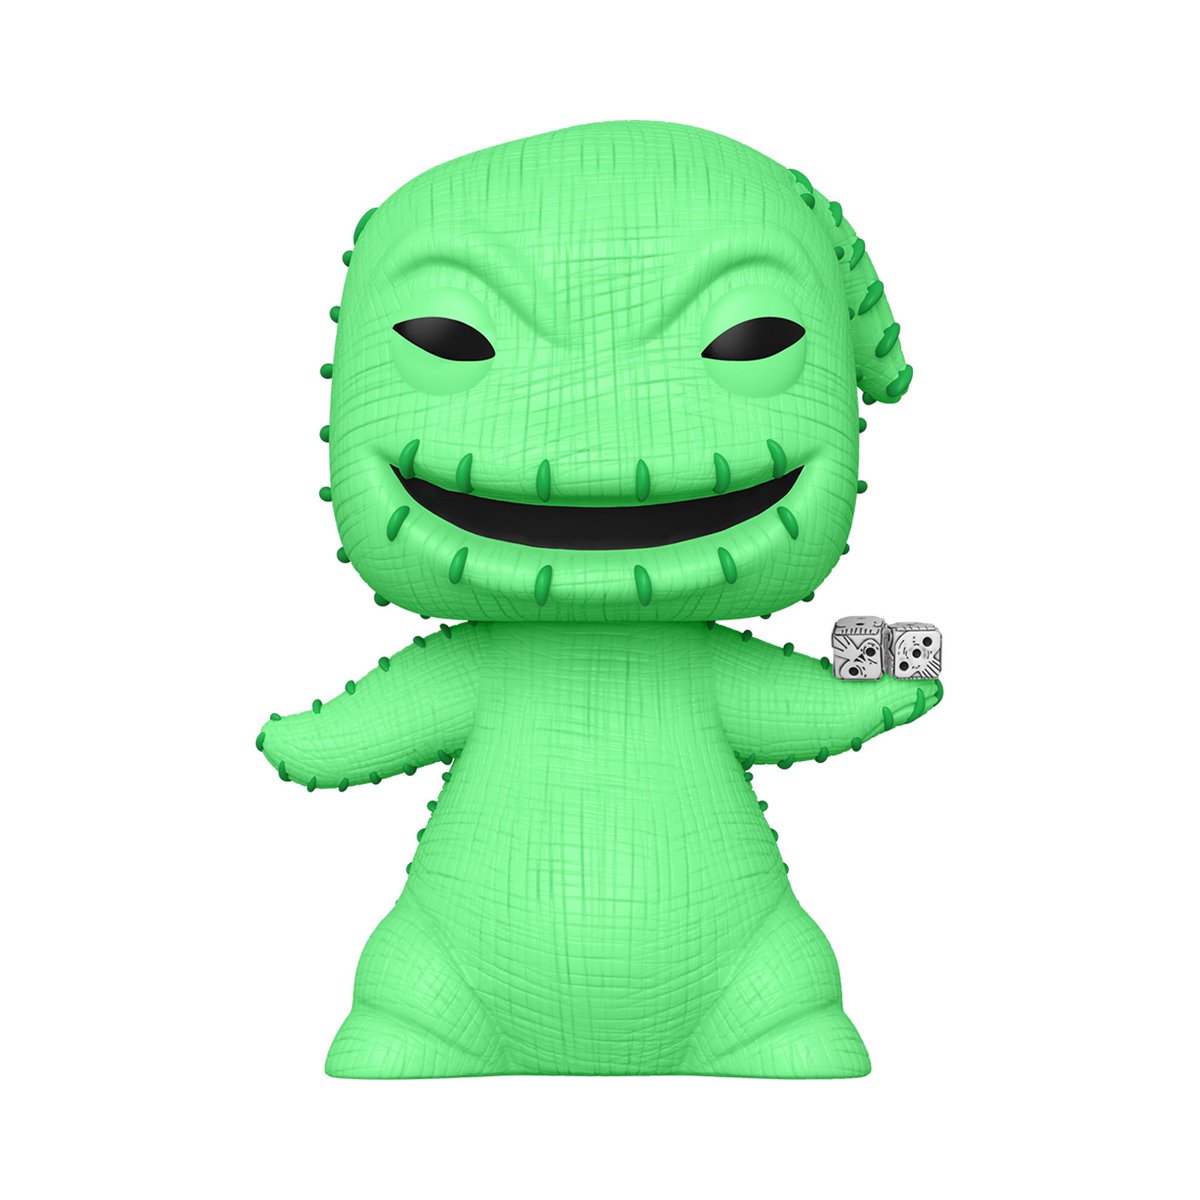 Retweetet. for the chance to WIN this Funko exclusive 10" (Glow-in-the-...